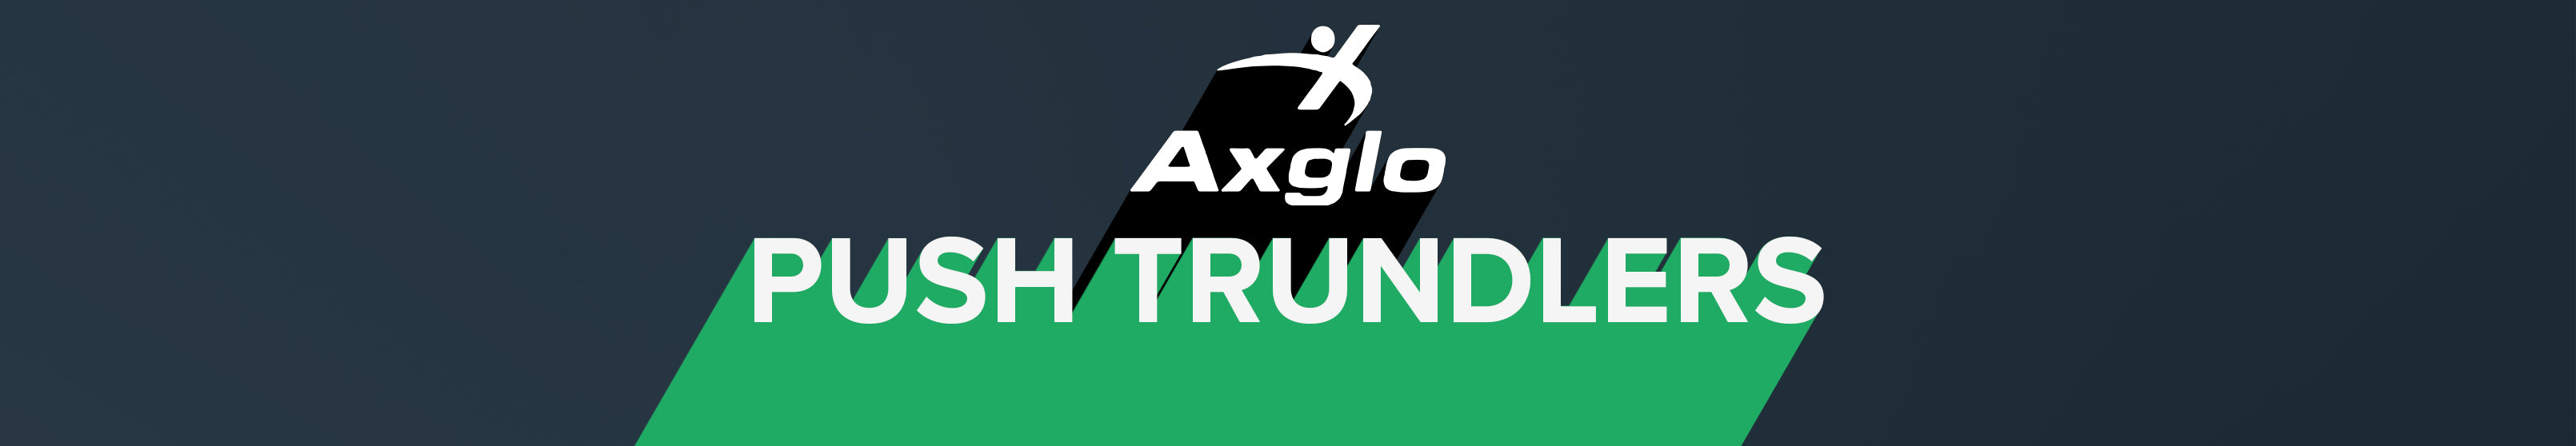 Axglo Trundlers